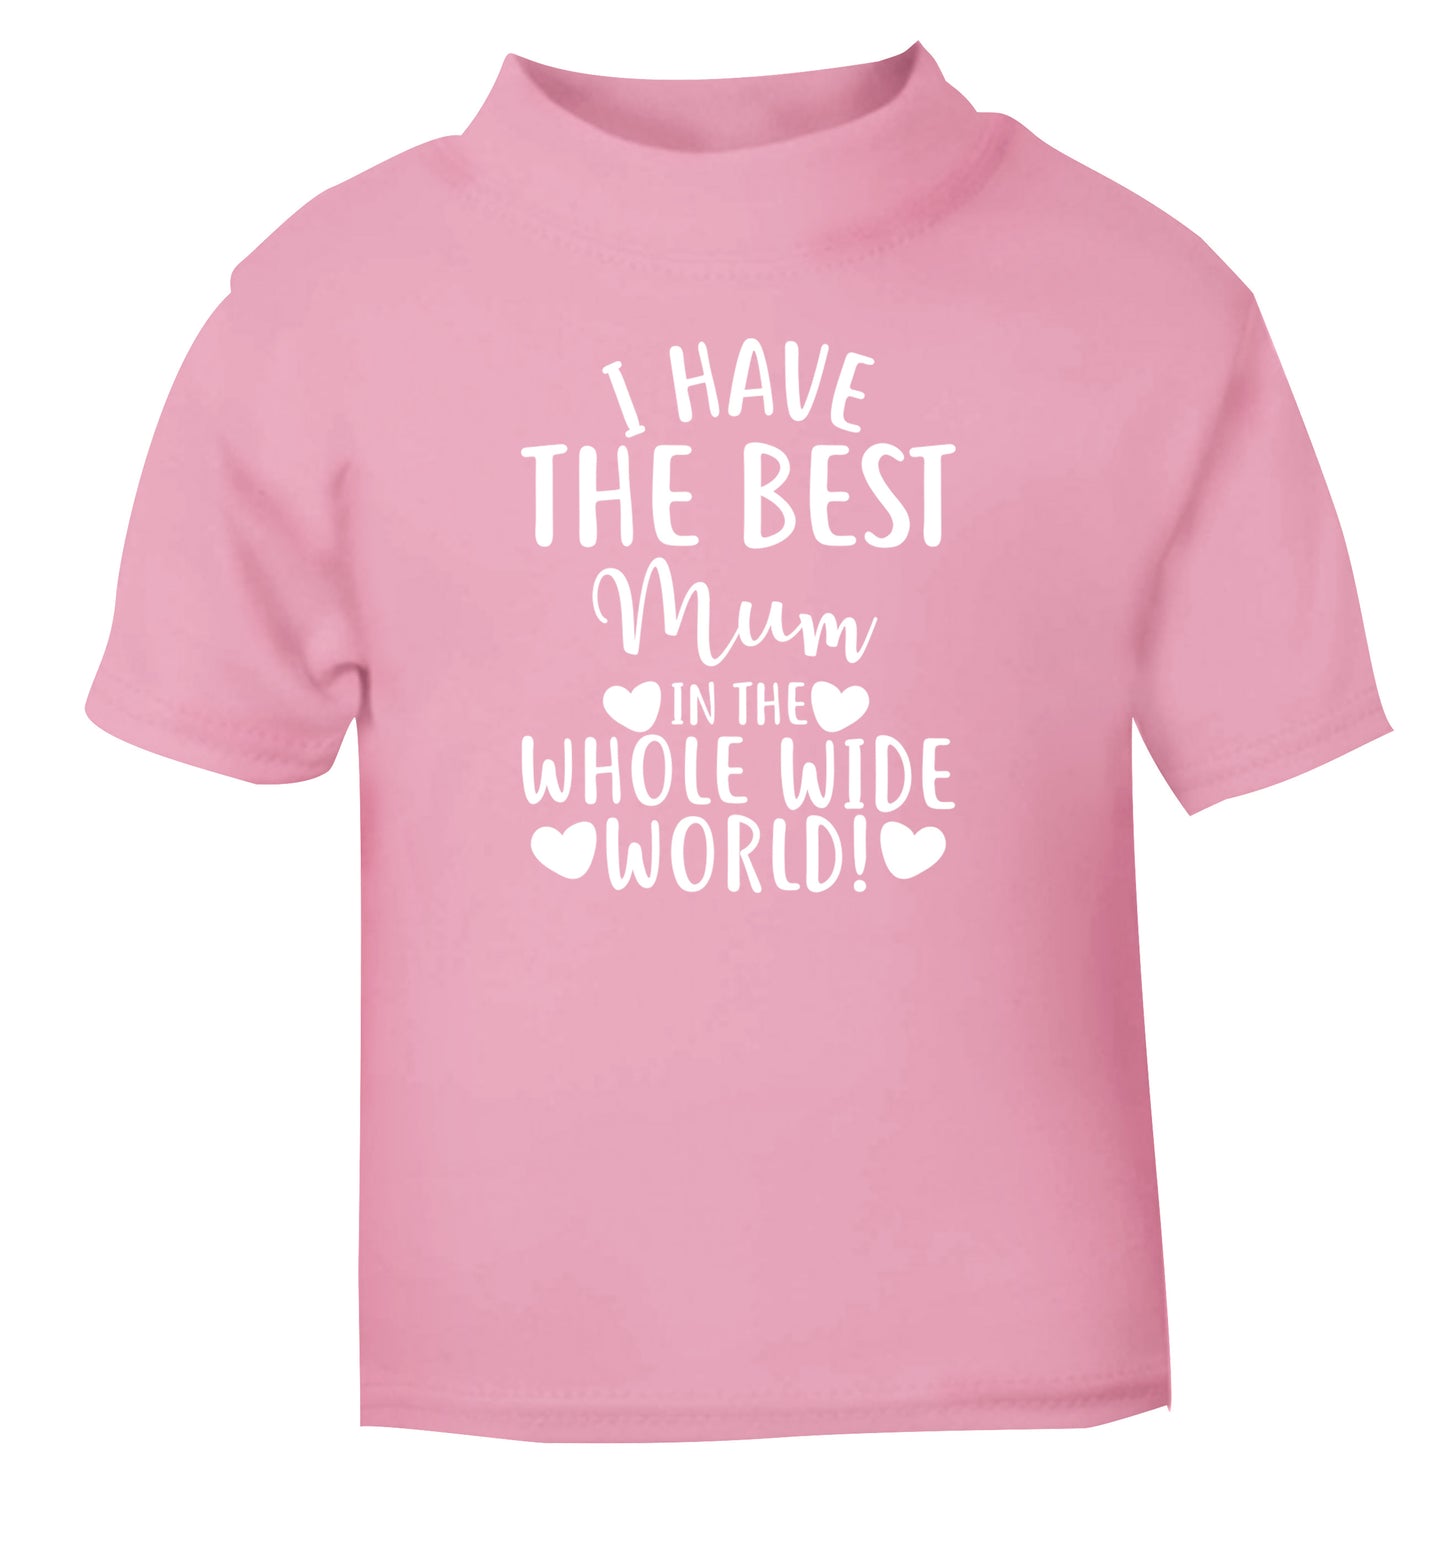 I have the best mum in the whole wide world! light pink Baby Toddler Tshirt 2 Years